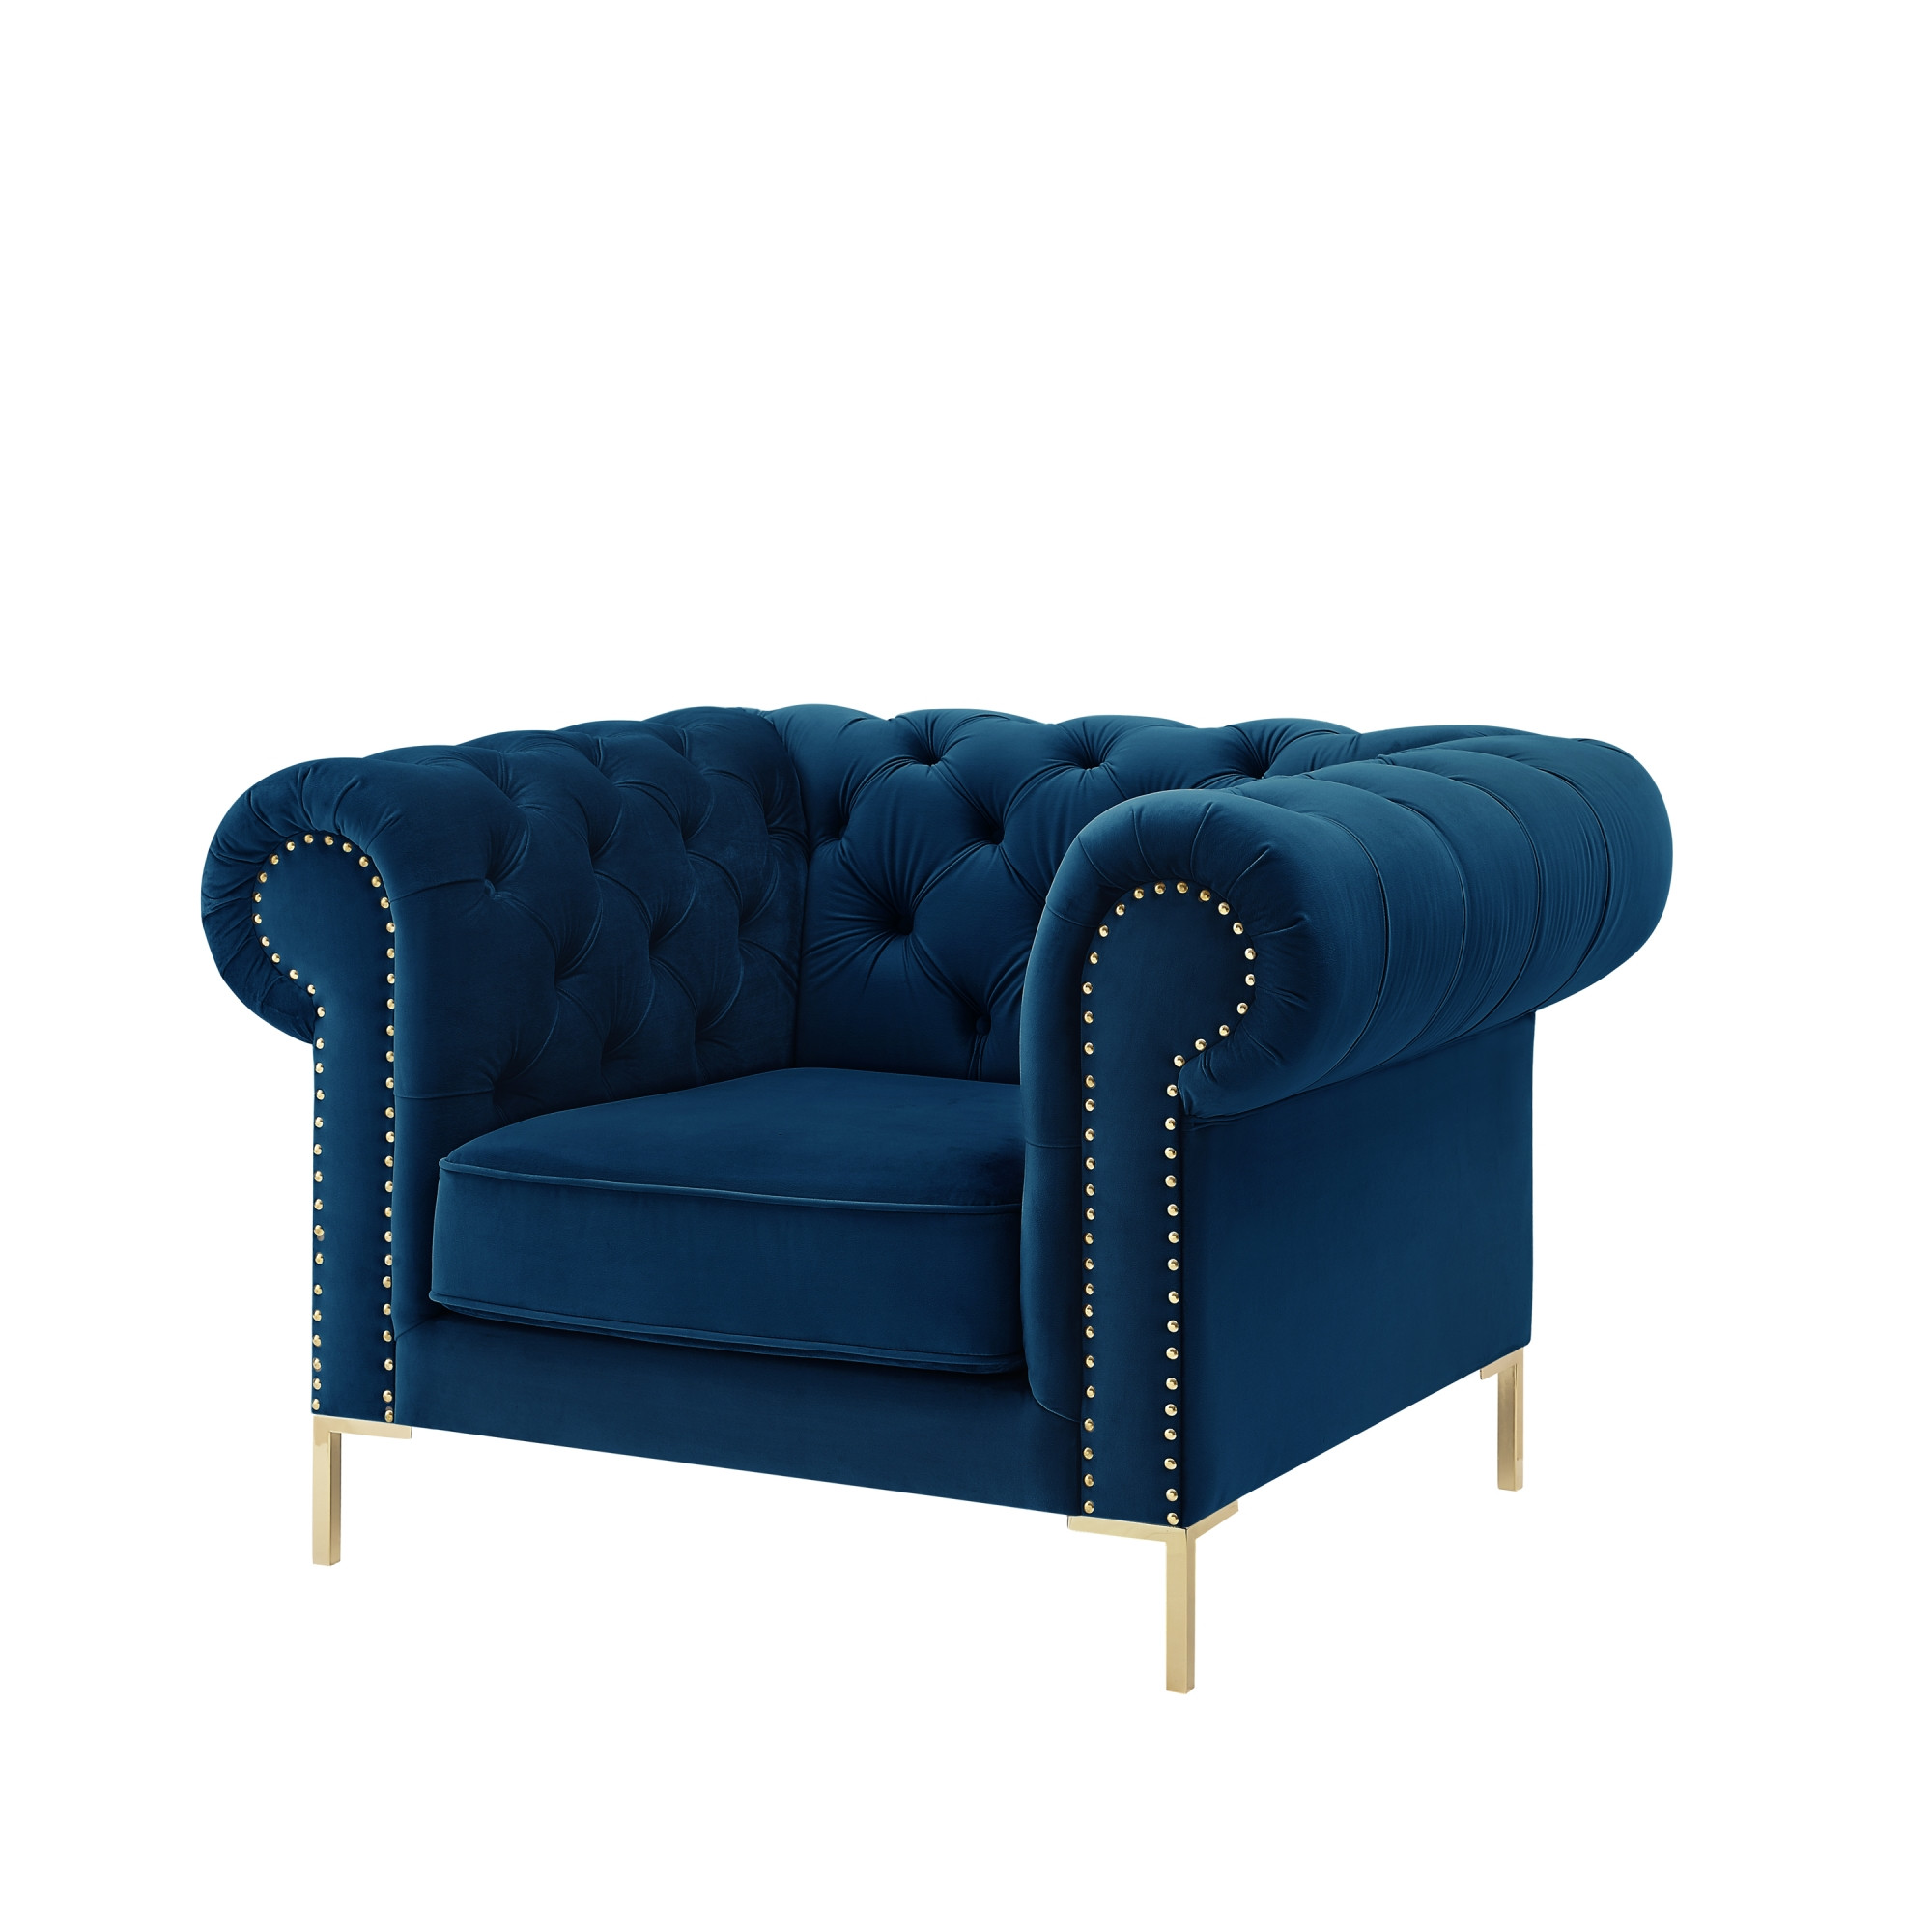 39" Navy Blue And Gold Velvet Tufted Chesterfield Chair-533855-1